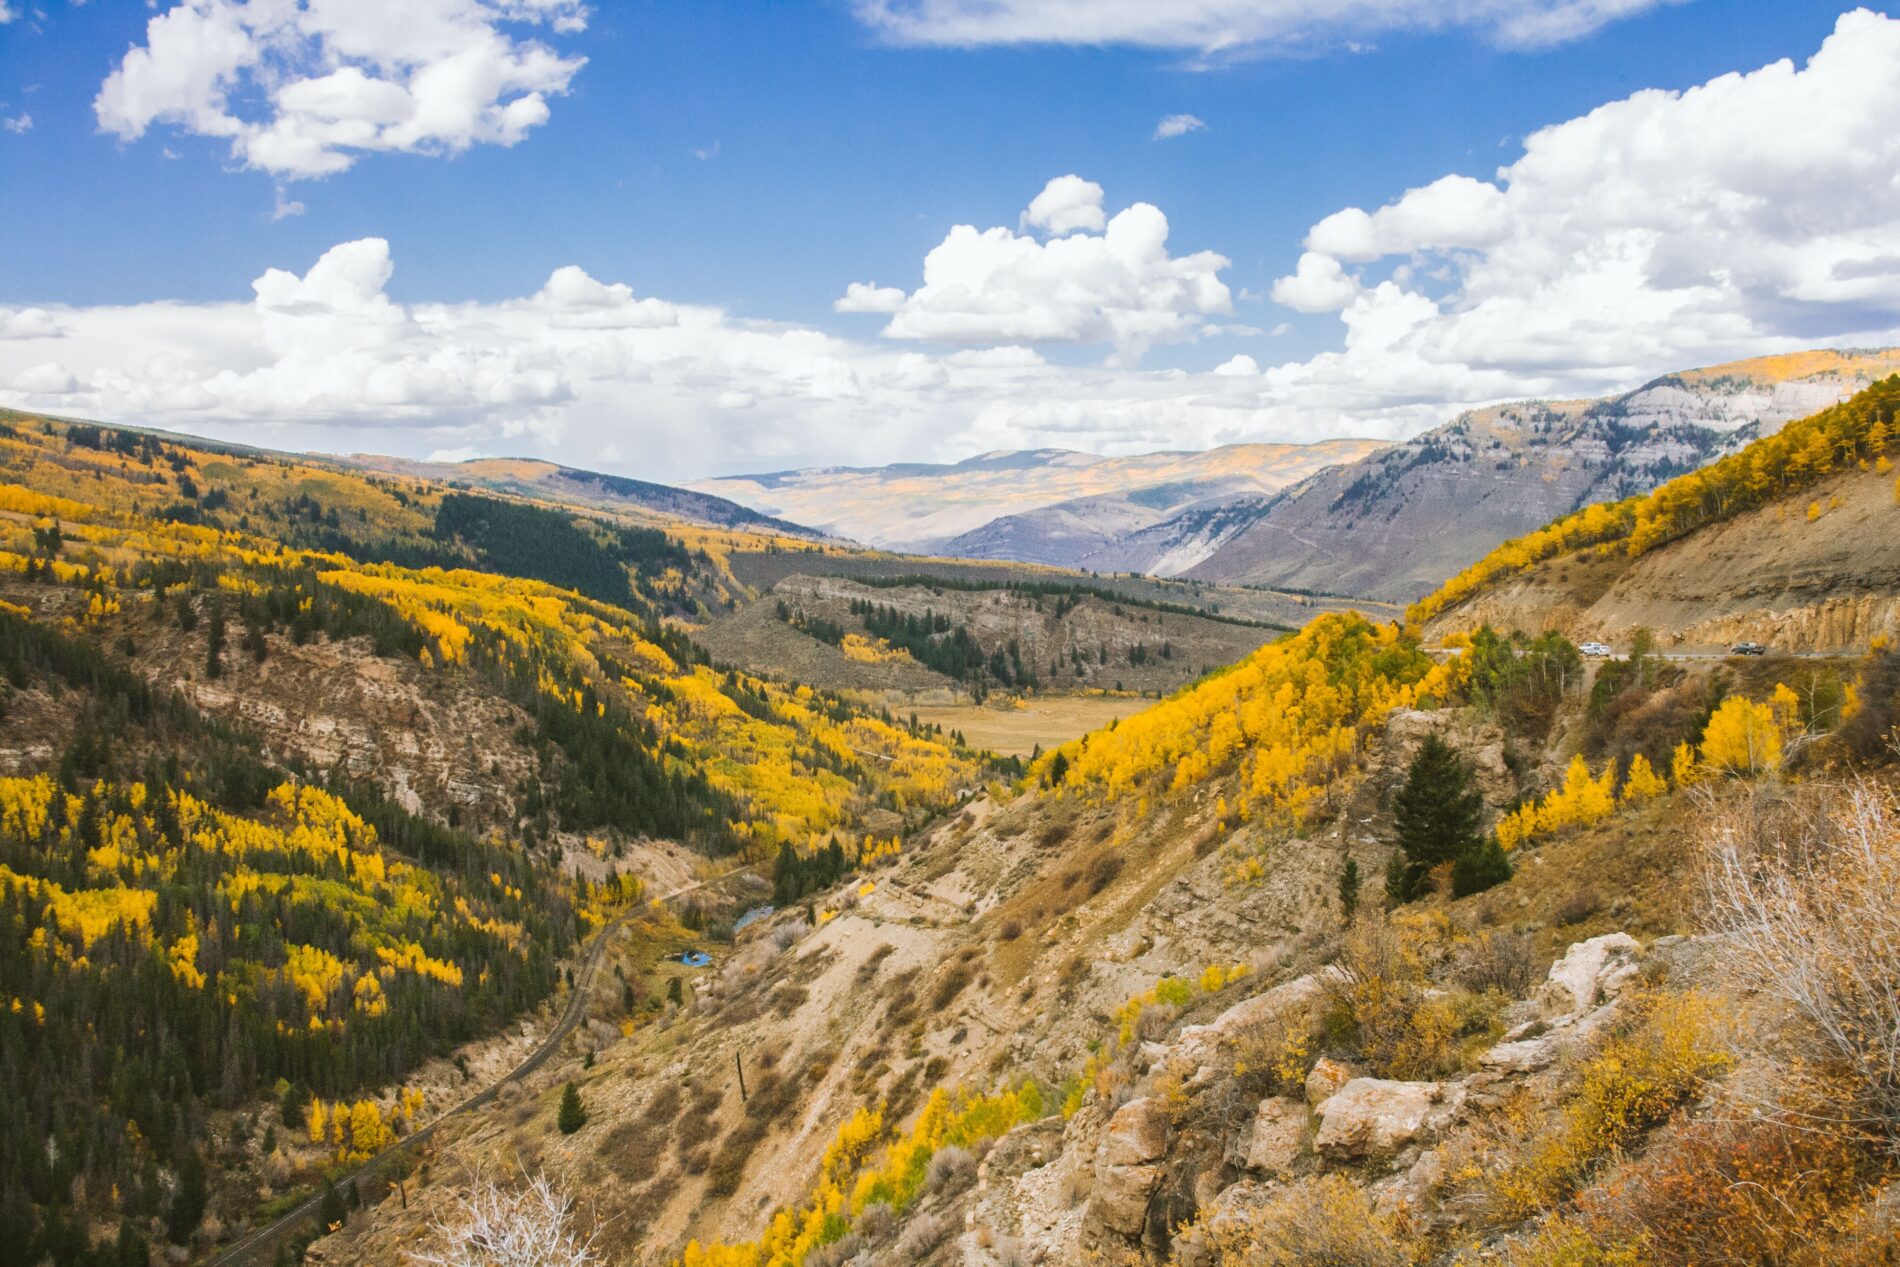 Mountain landscape of a KODI Rafting destination with autumn trees, rocky terrain, and cloudy sky.